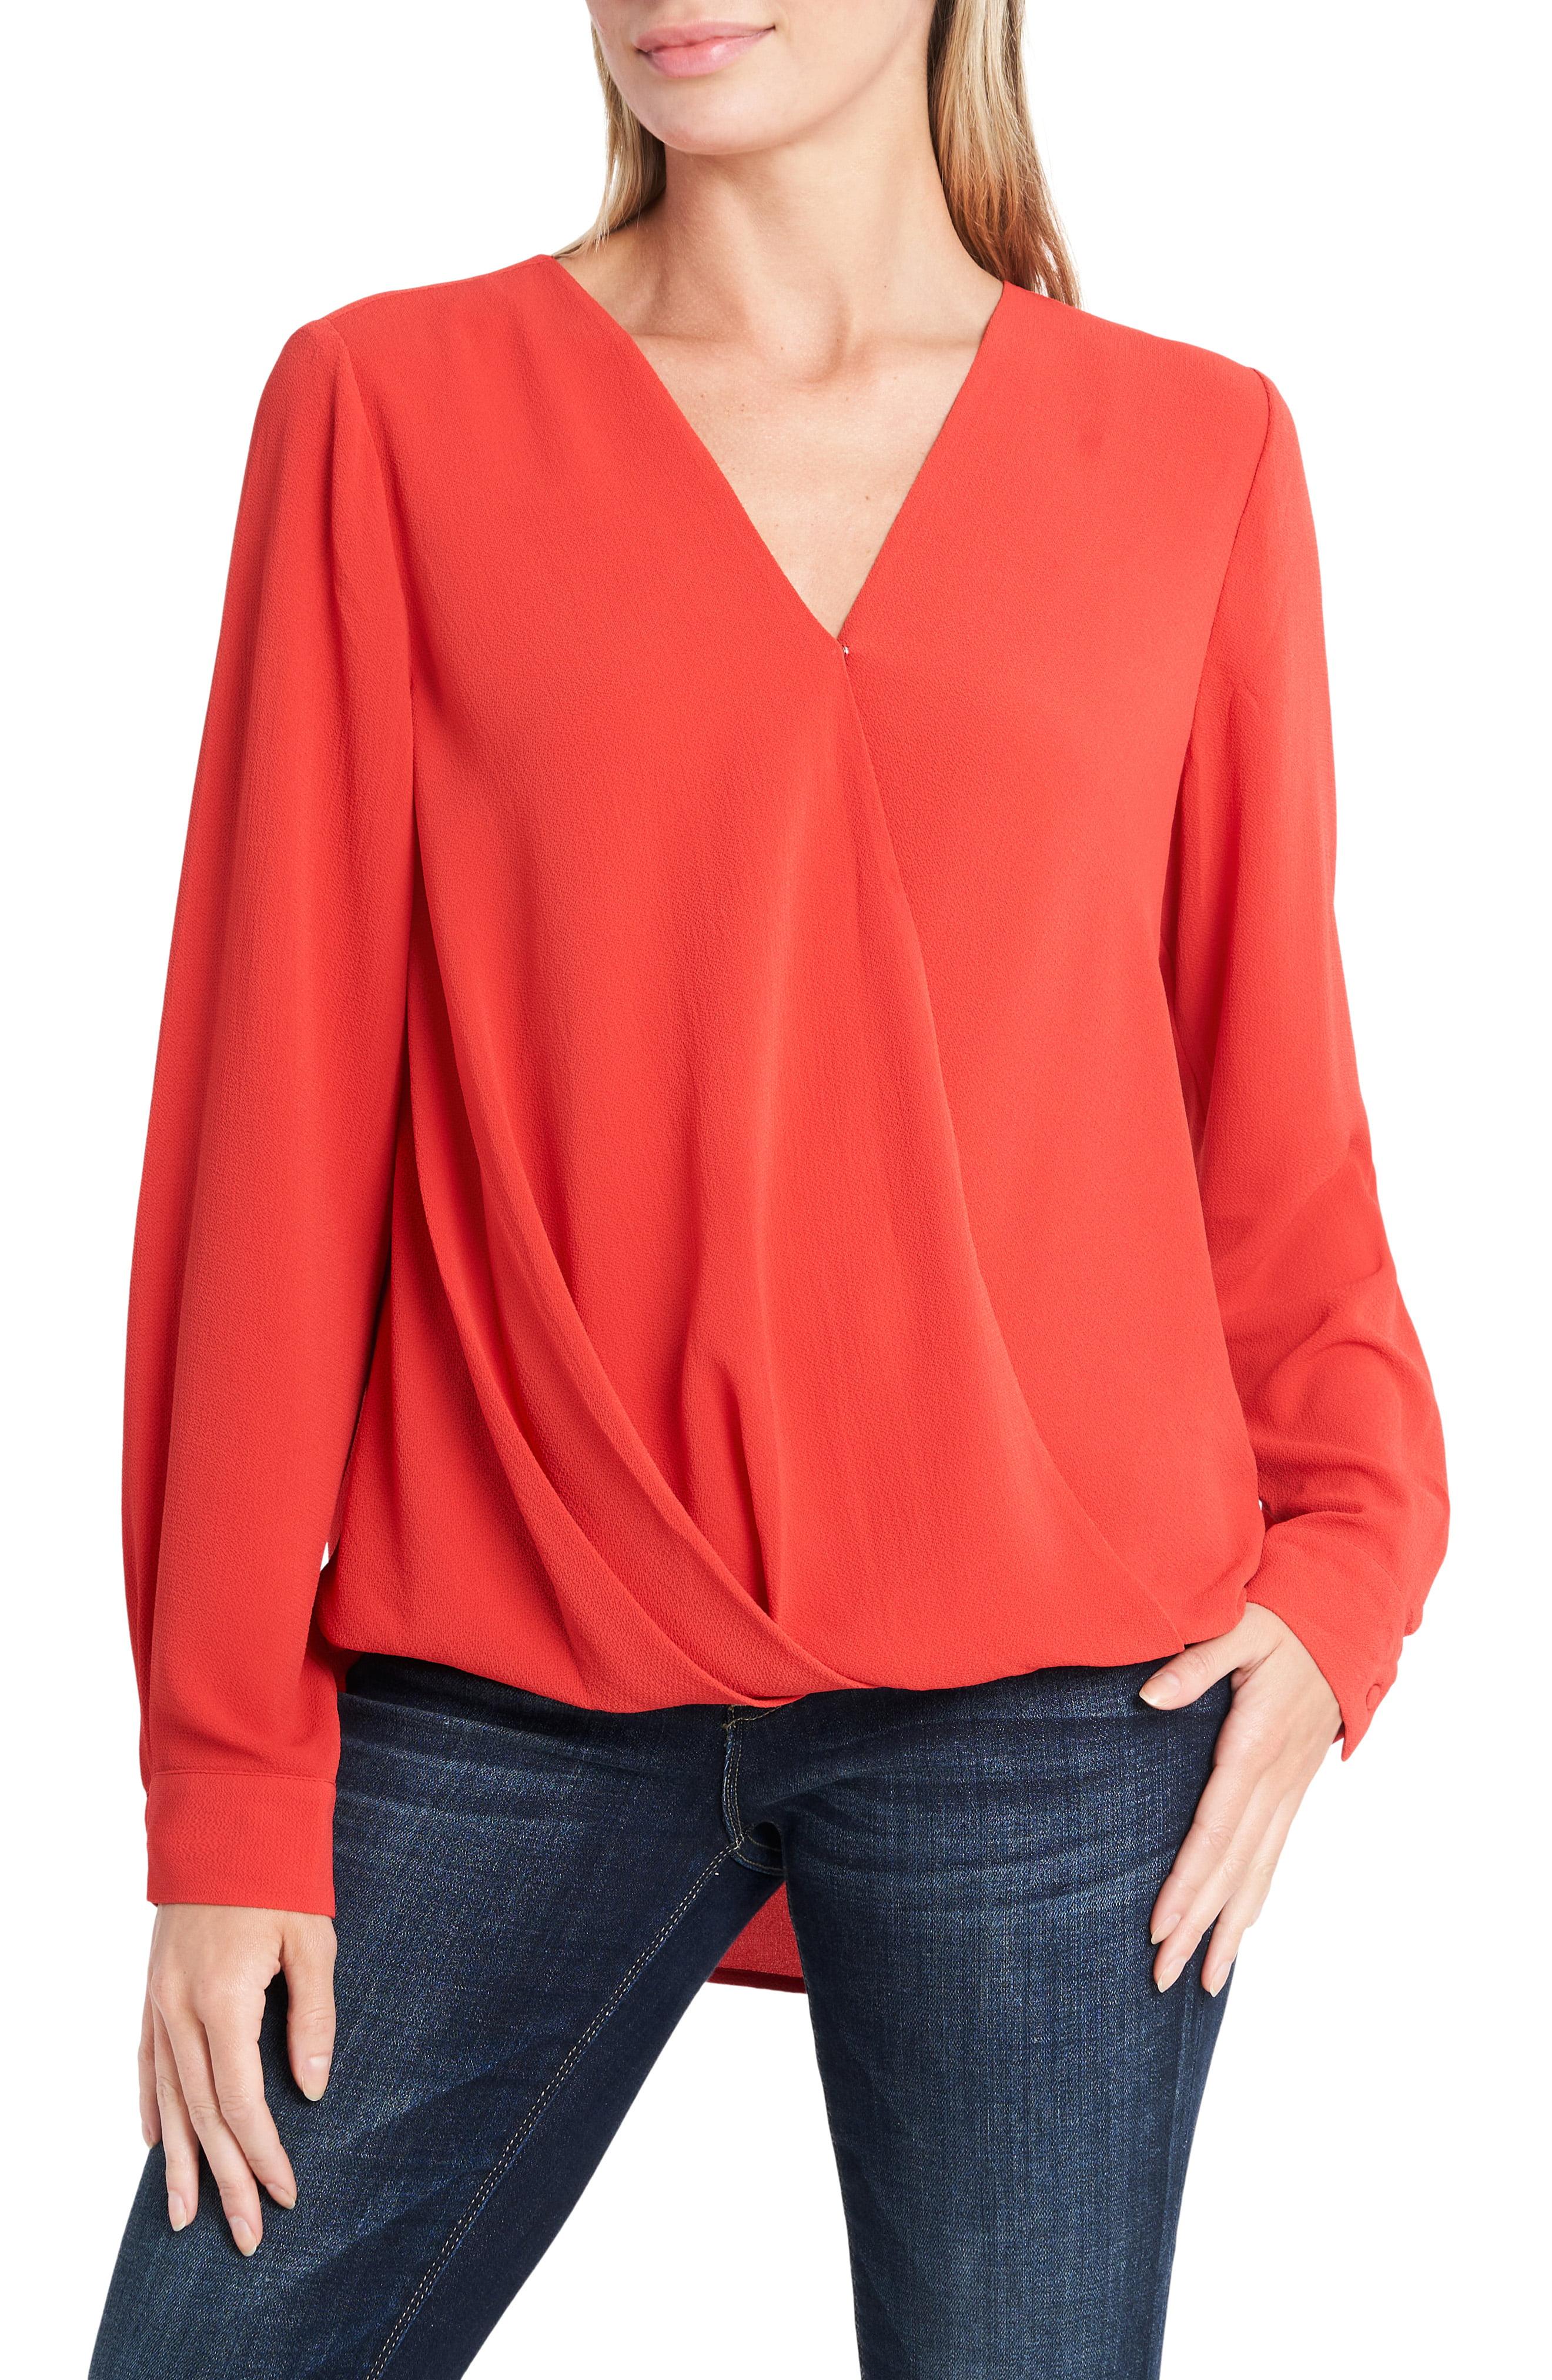 Vince Camuto Long Sleeve Faux Wrap Blouse in Red - Lyst